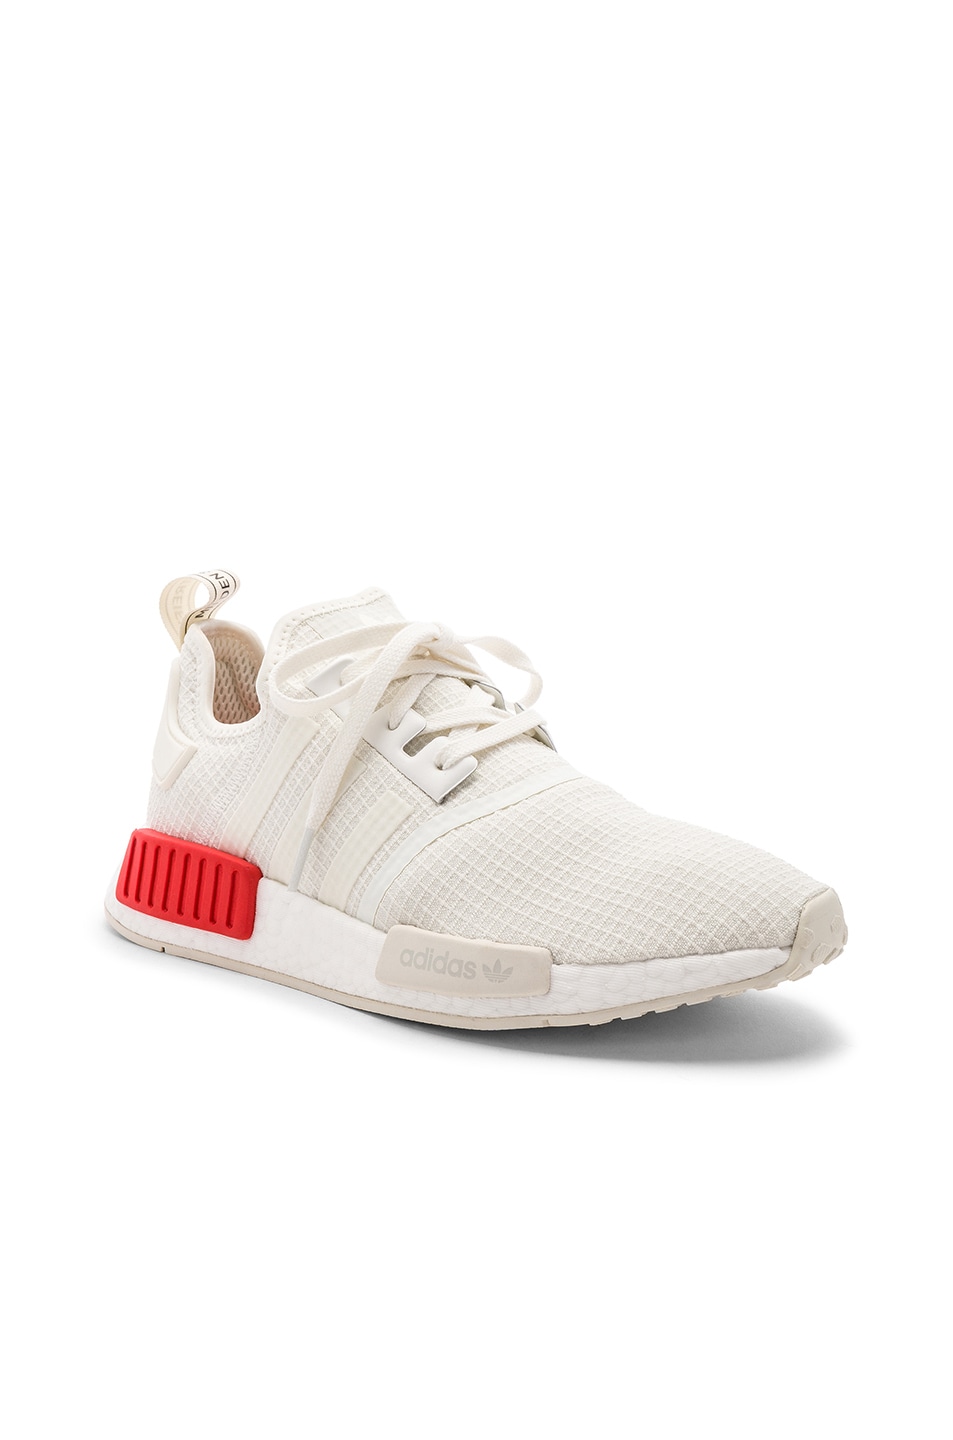 Image 1 of adidas Originals NMD R1 in Off White & Off White & Lush Red